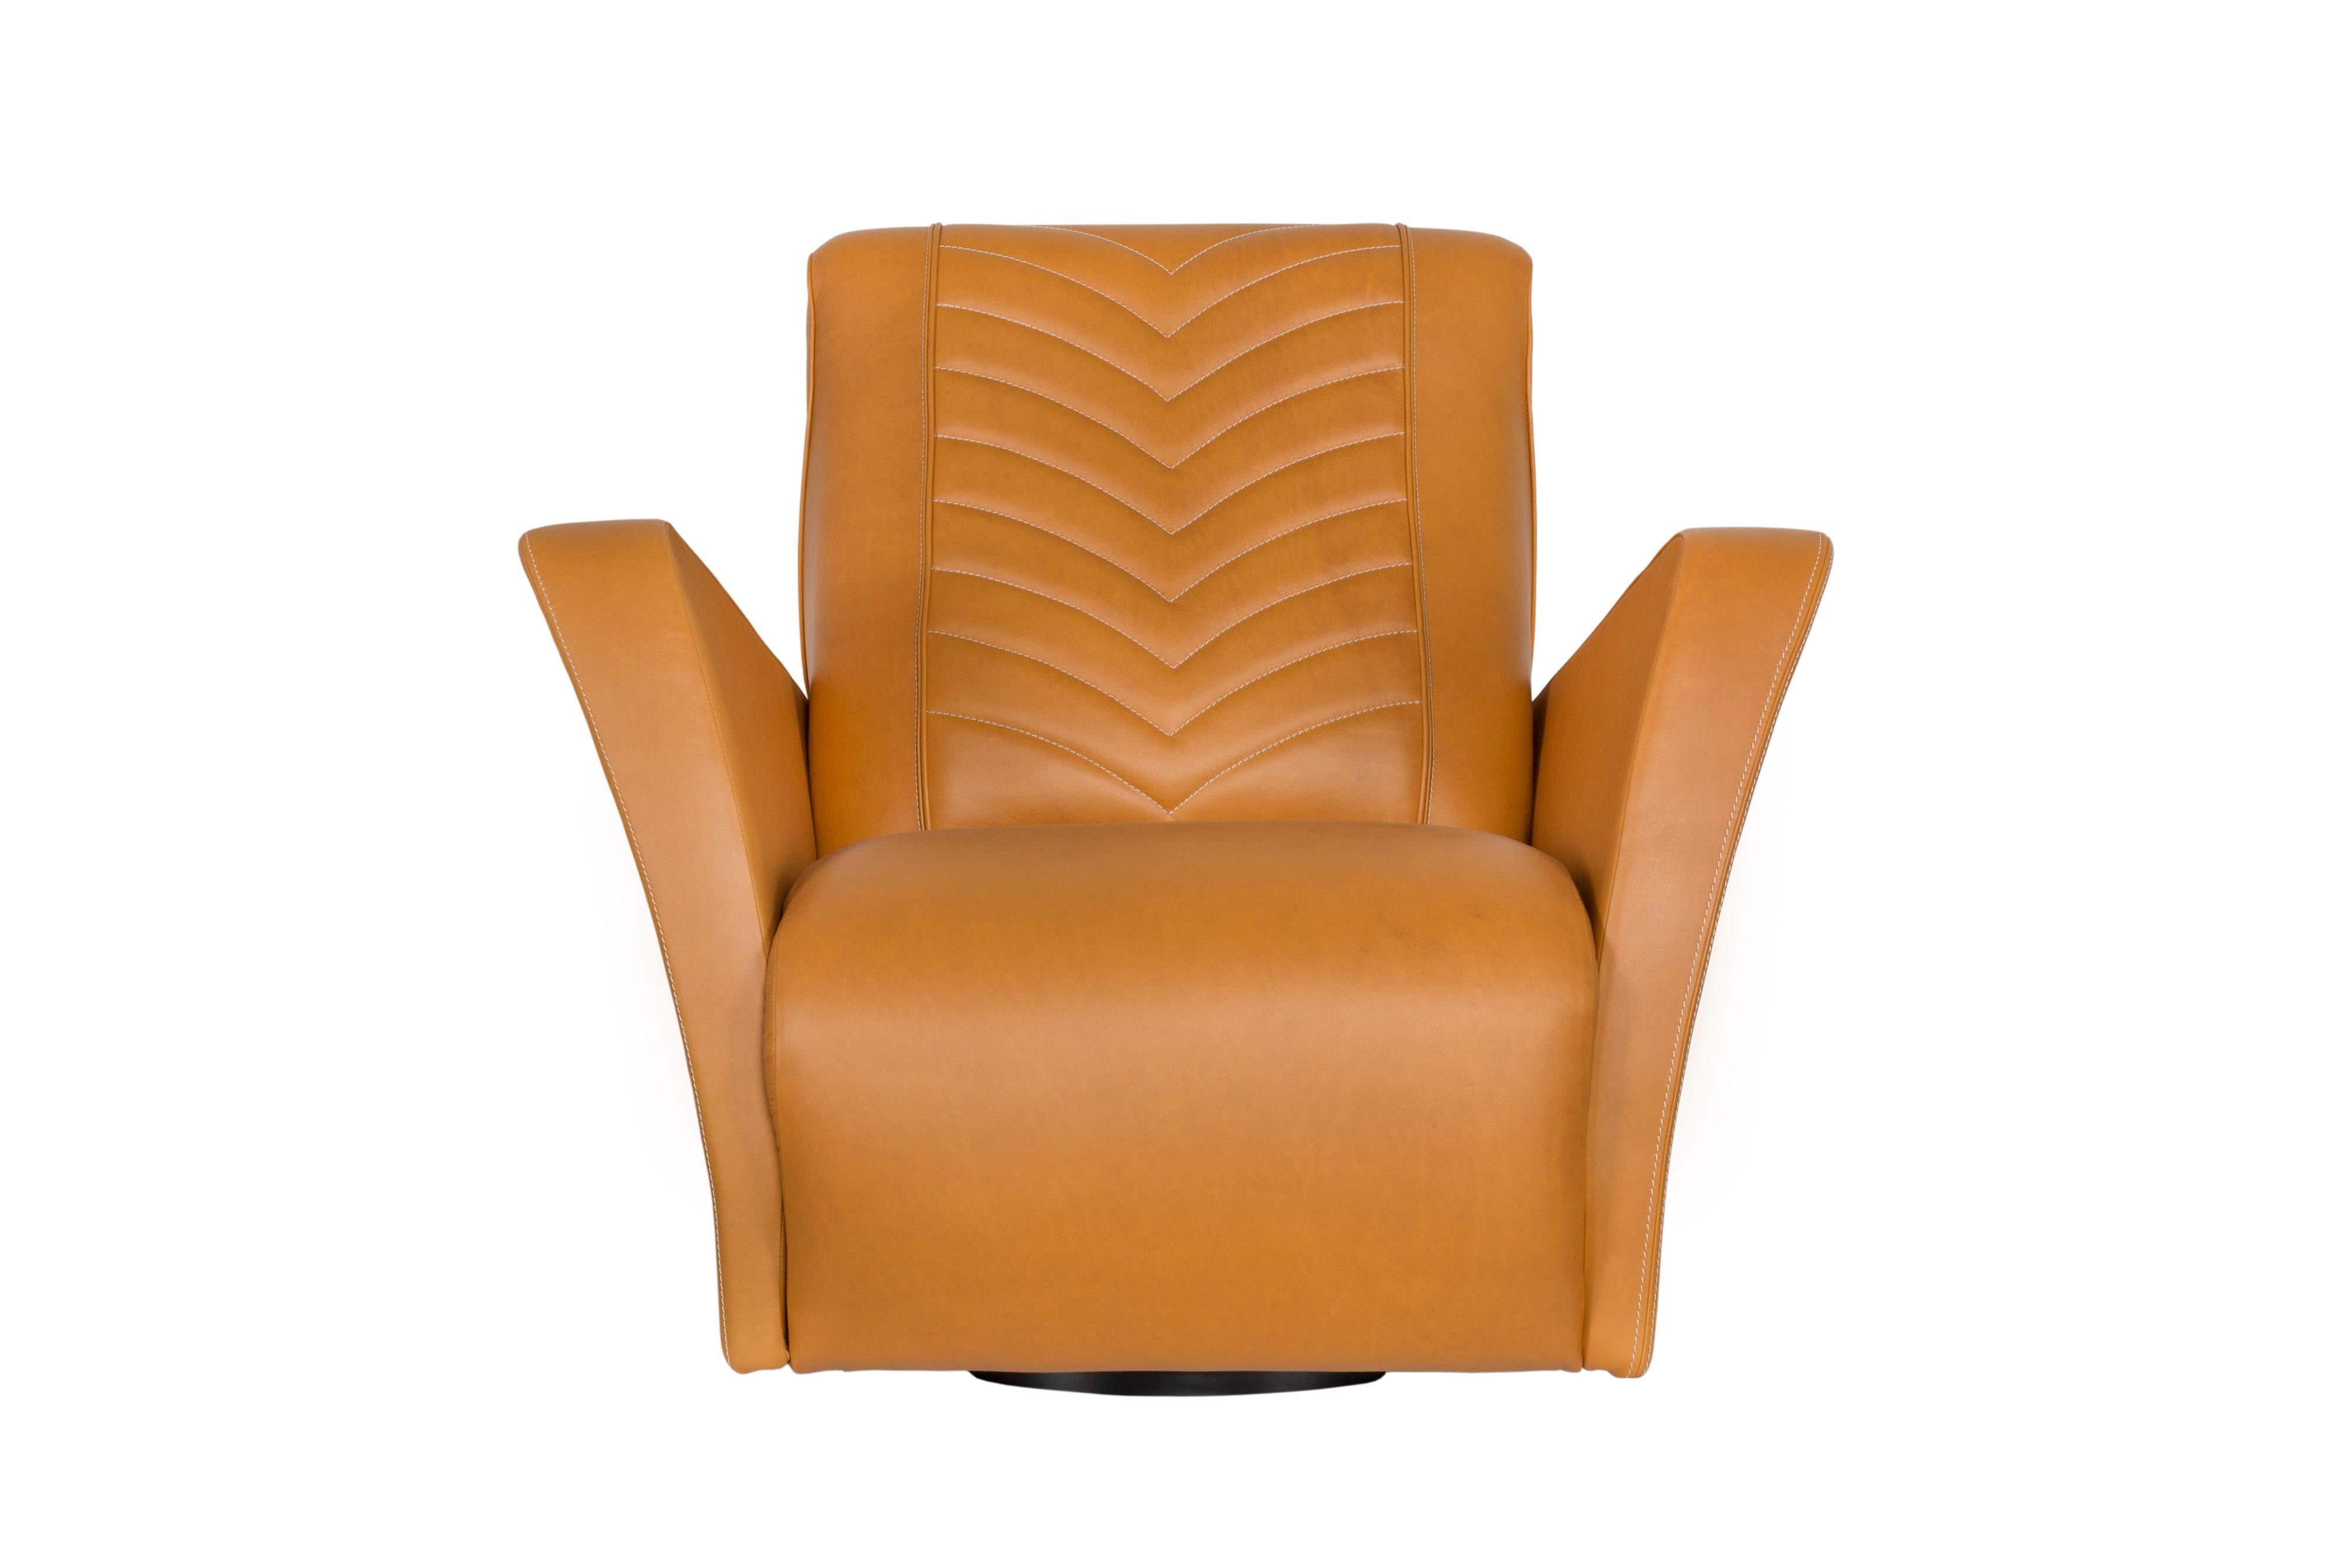 MacQueen Armchair, Modern Collection, Handcrafted in Portugal - Europe by GF Modern.

With an elegant design inspired by 1960's and 1970's sports cars, this armchair has beautiful details that capture the eye and takes us to an age where big